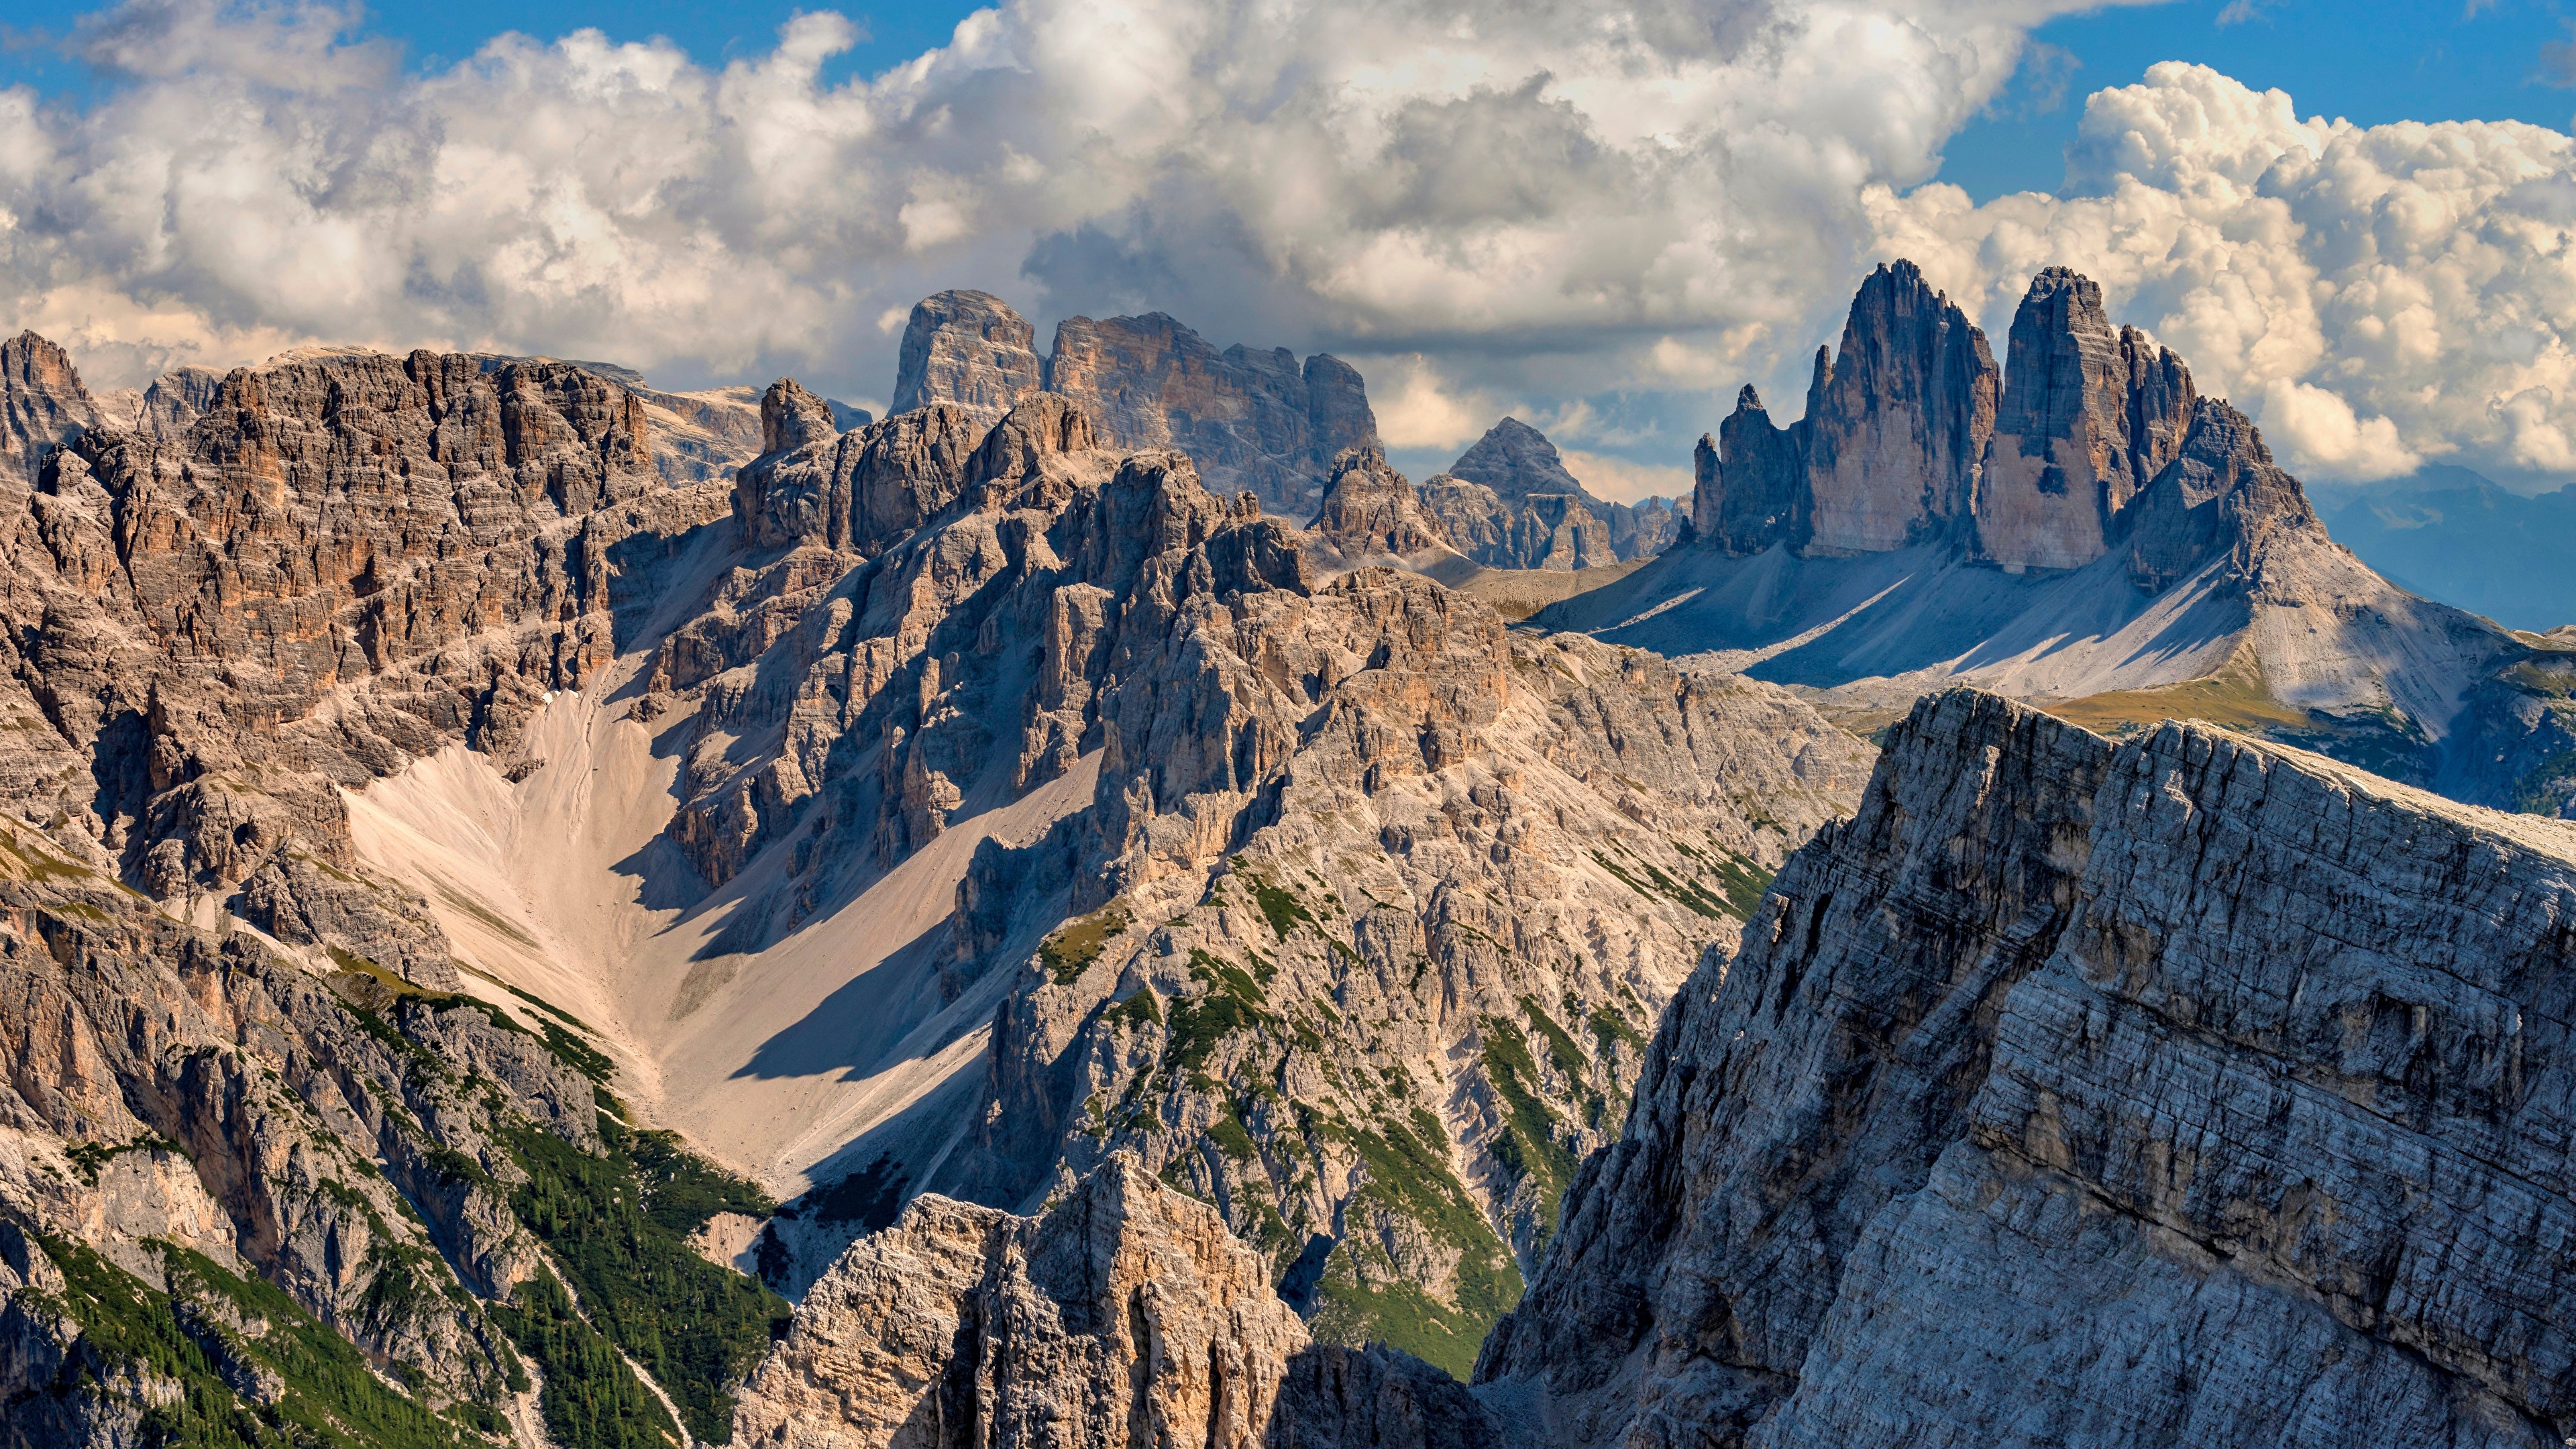 General 3840x2160 Italy Dolomites Alps nature sky mountains clouds photography